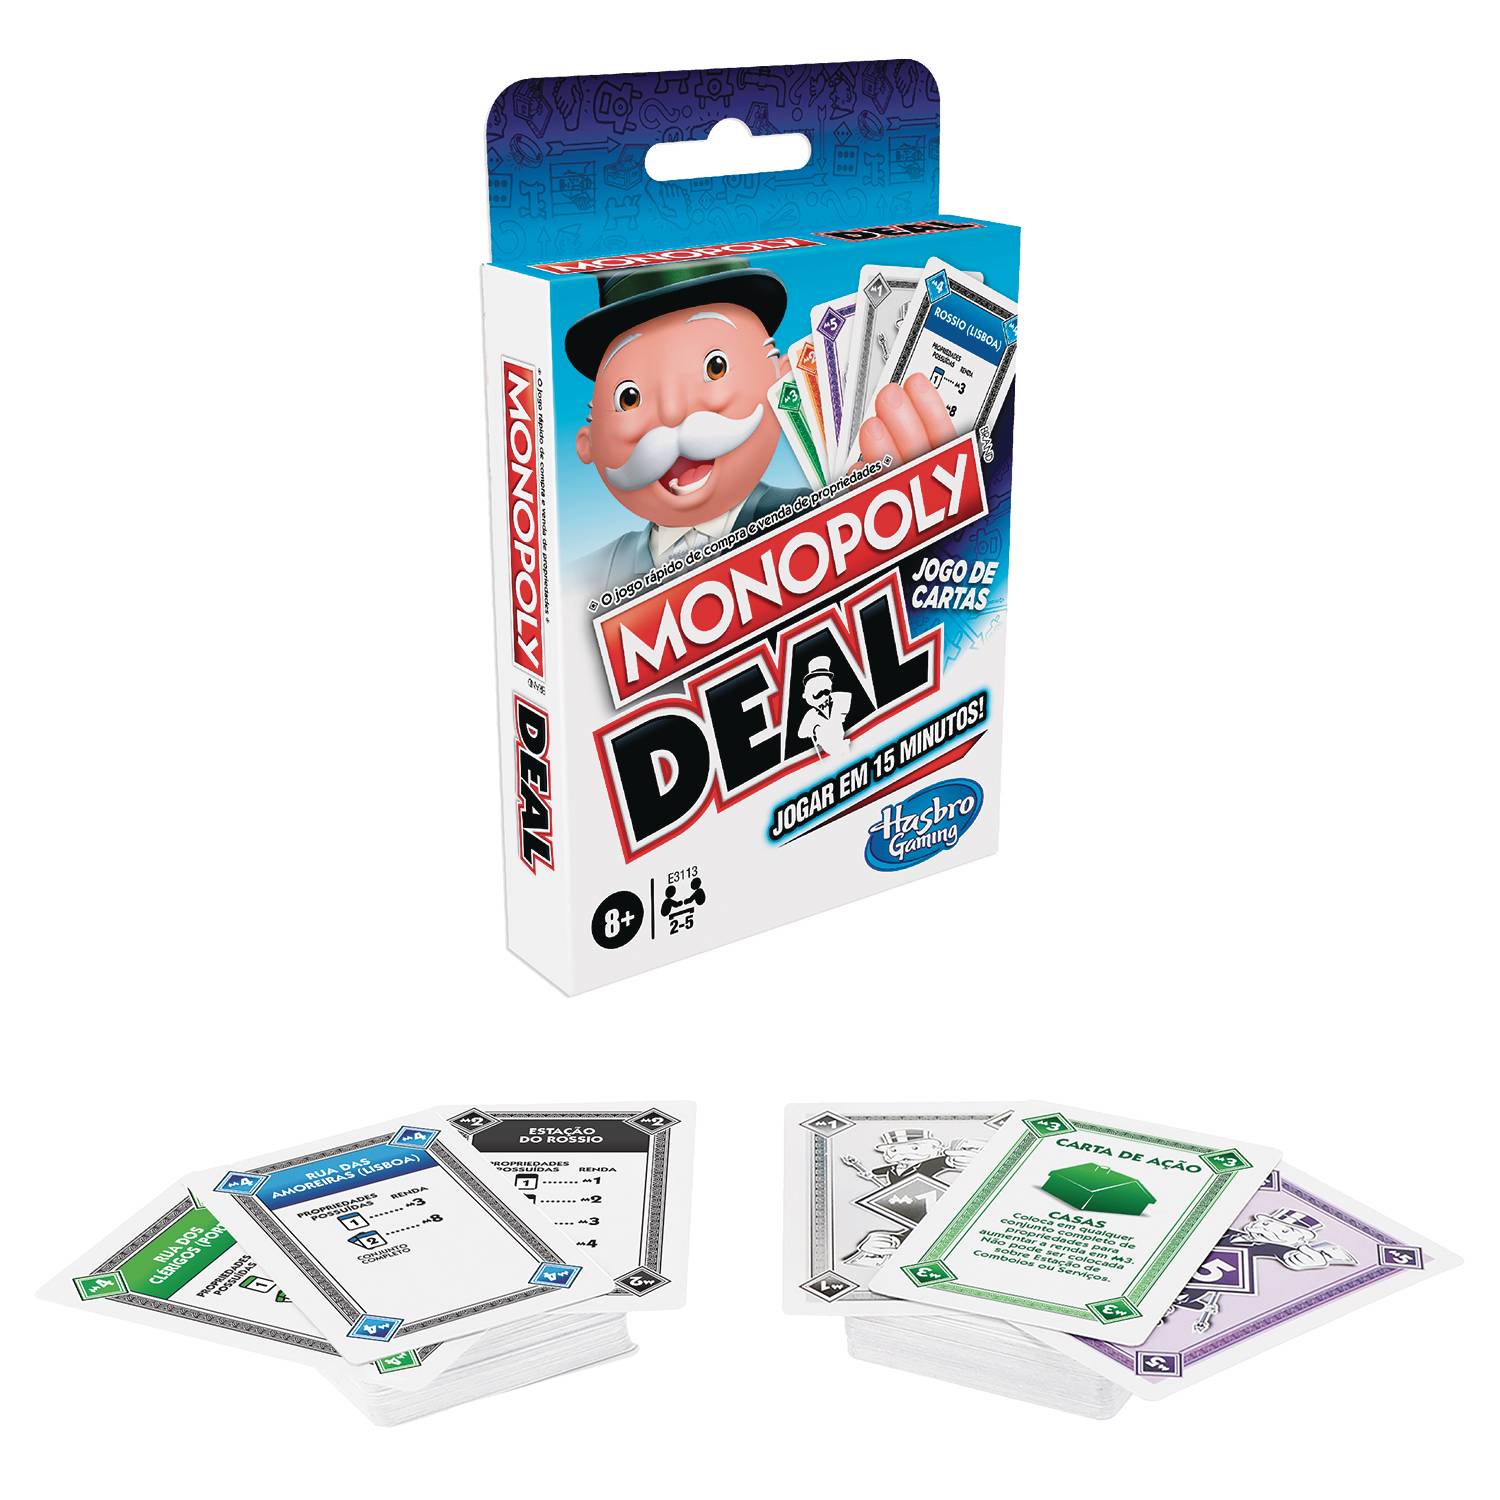 Monopoly Deal Card Game for sale online 